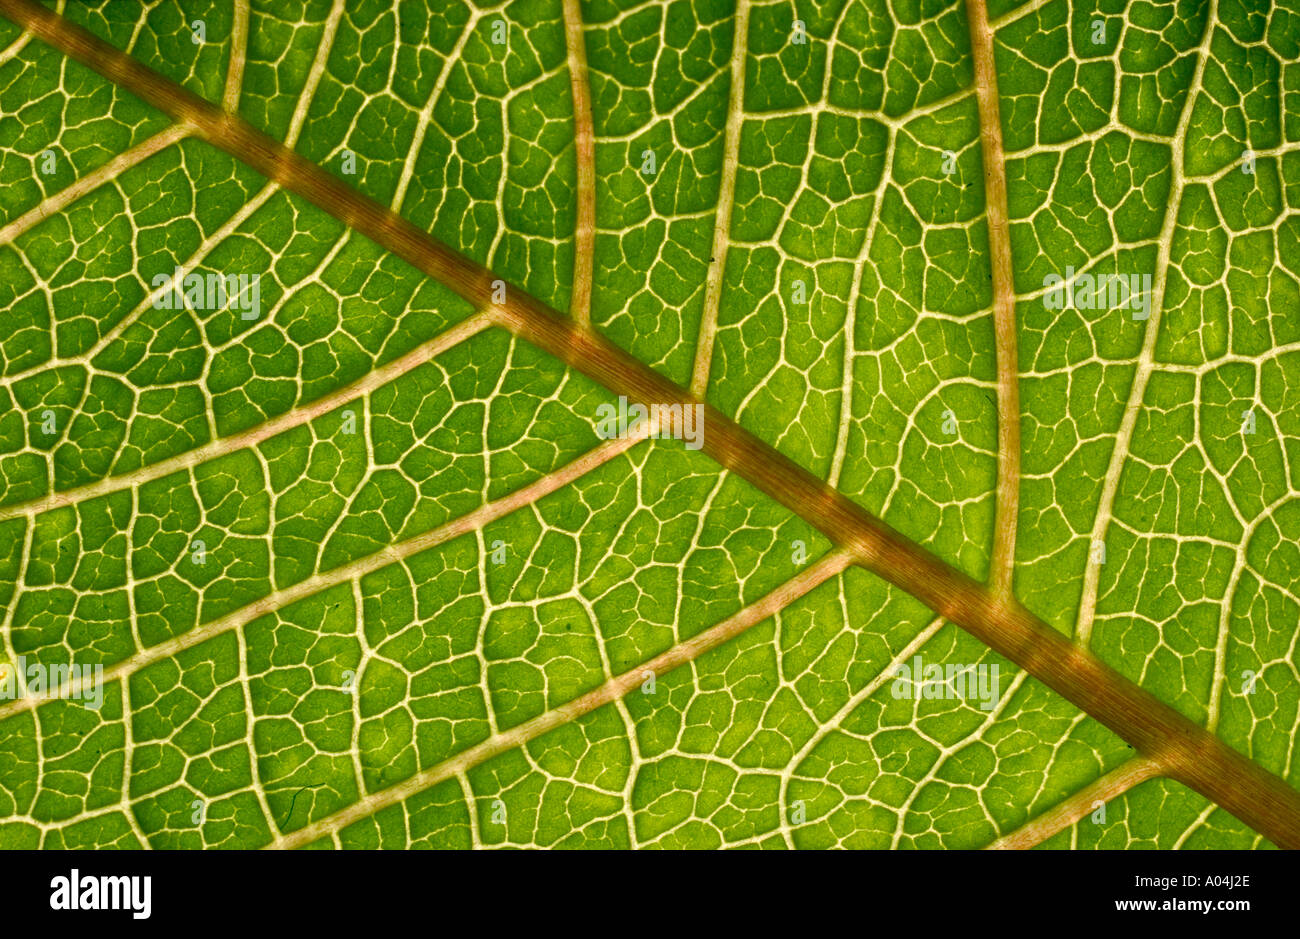 Macro close up, back-lit green leaf structure showing veins Stock Photo